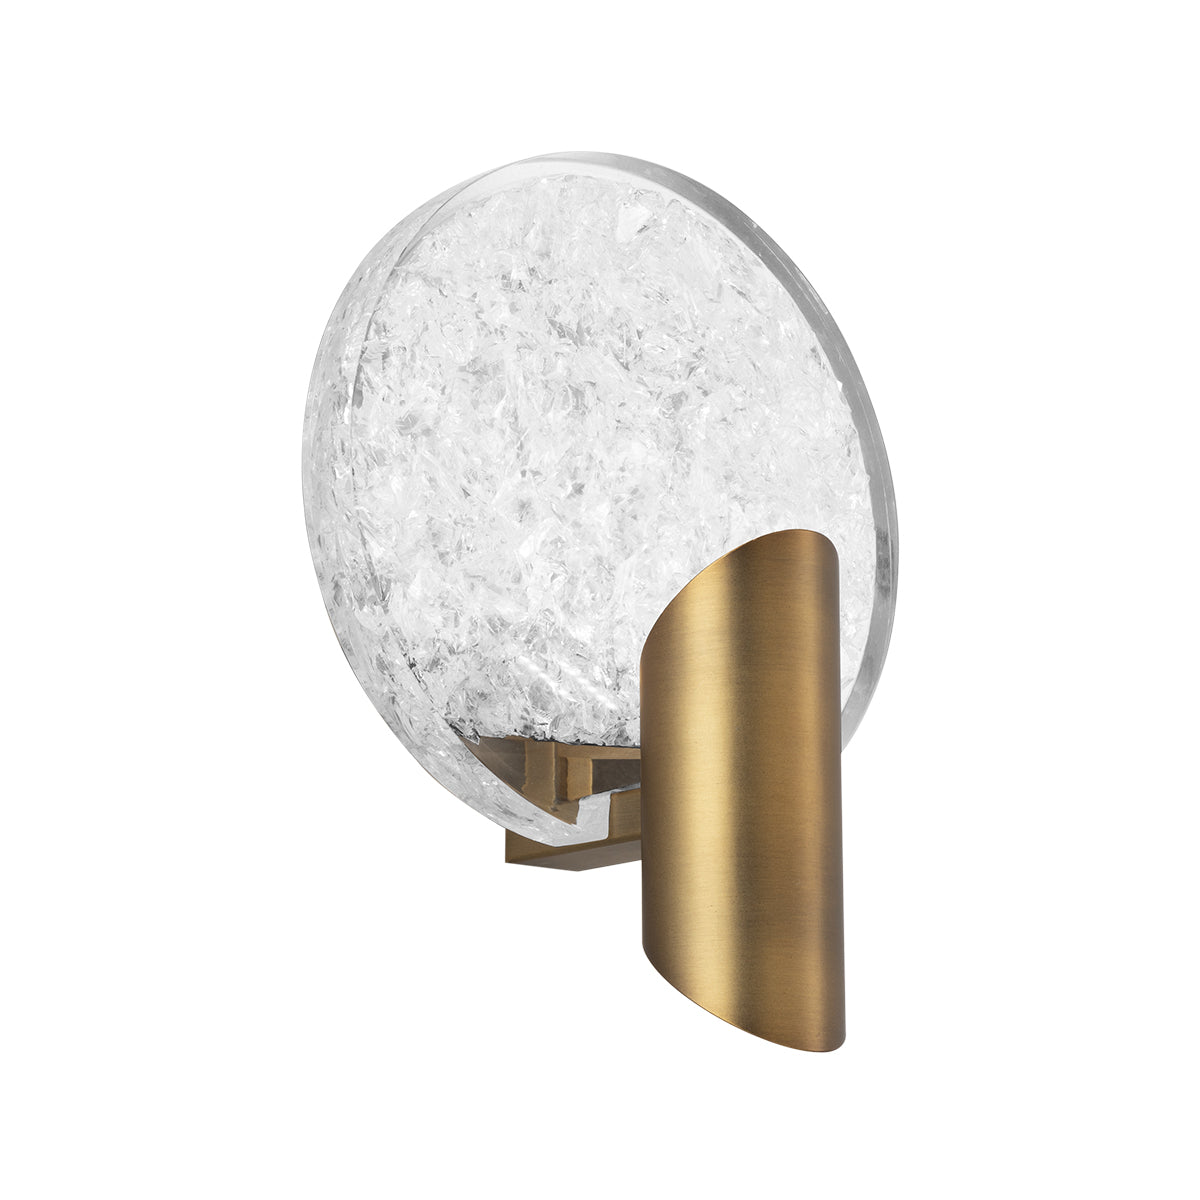 Modern Forms Canada - LED Wall Sconce - Oracle - Aged Brass- Union Lighting Luminaires Decor